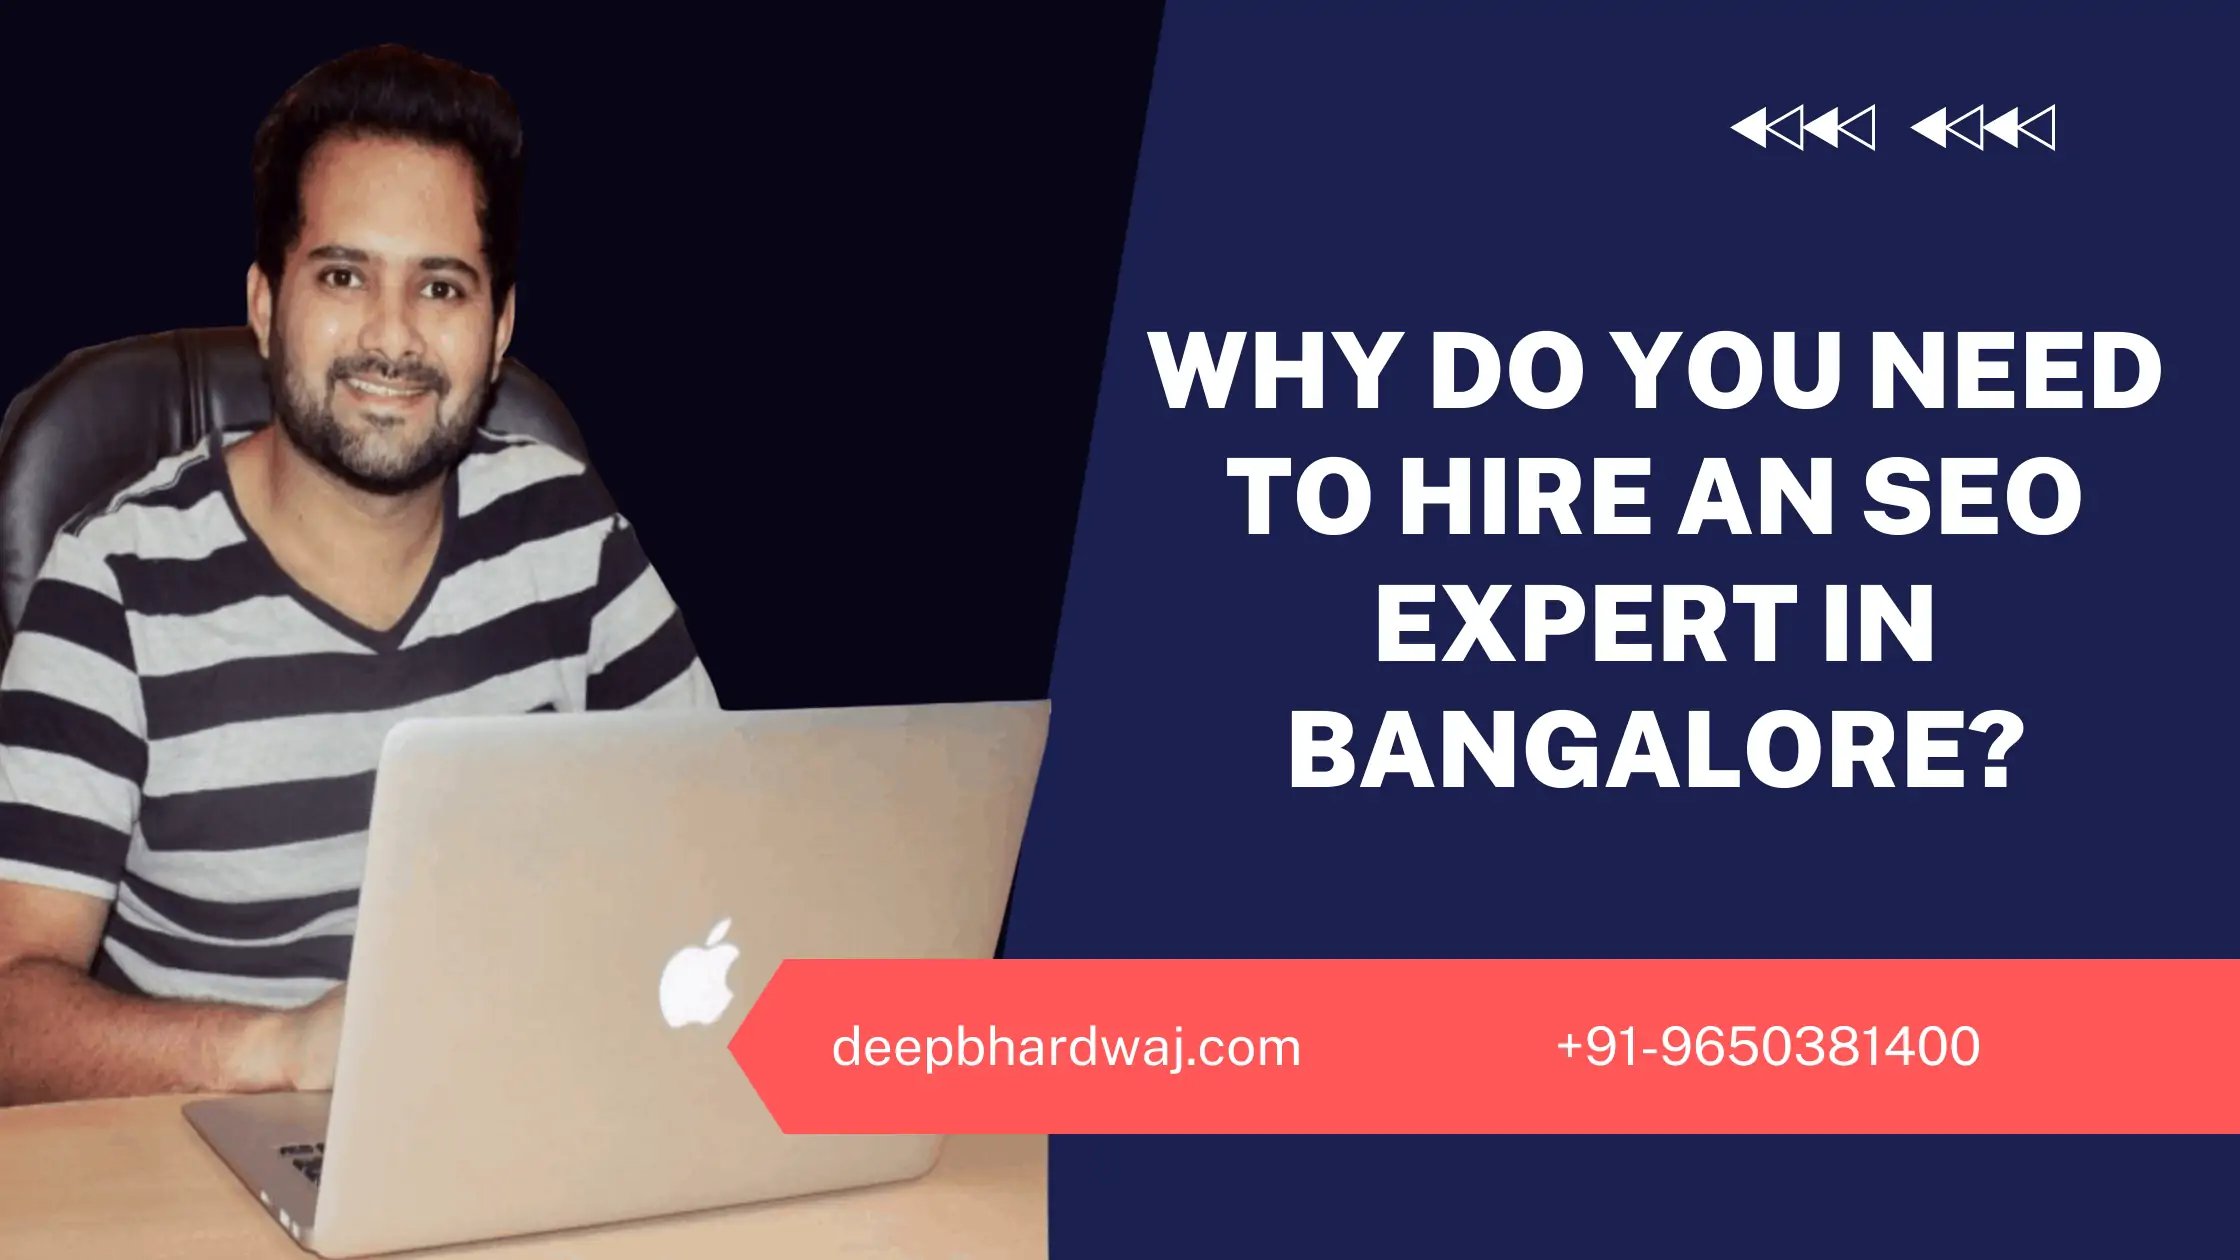 Why do you need to hire an SEO expert in Bangalore?